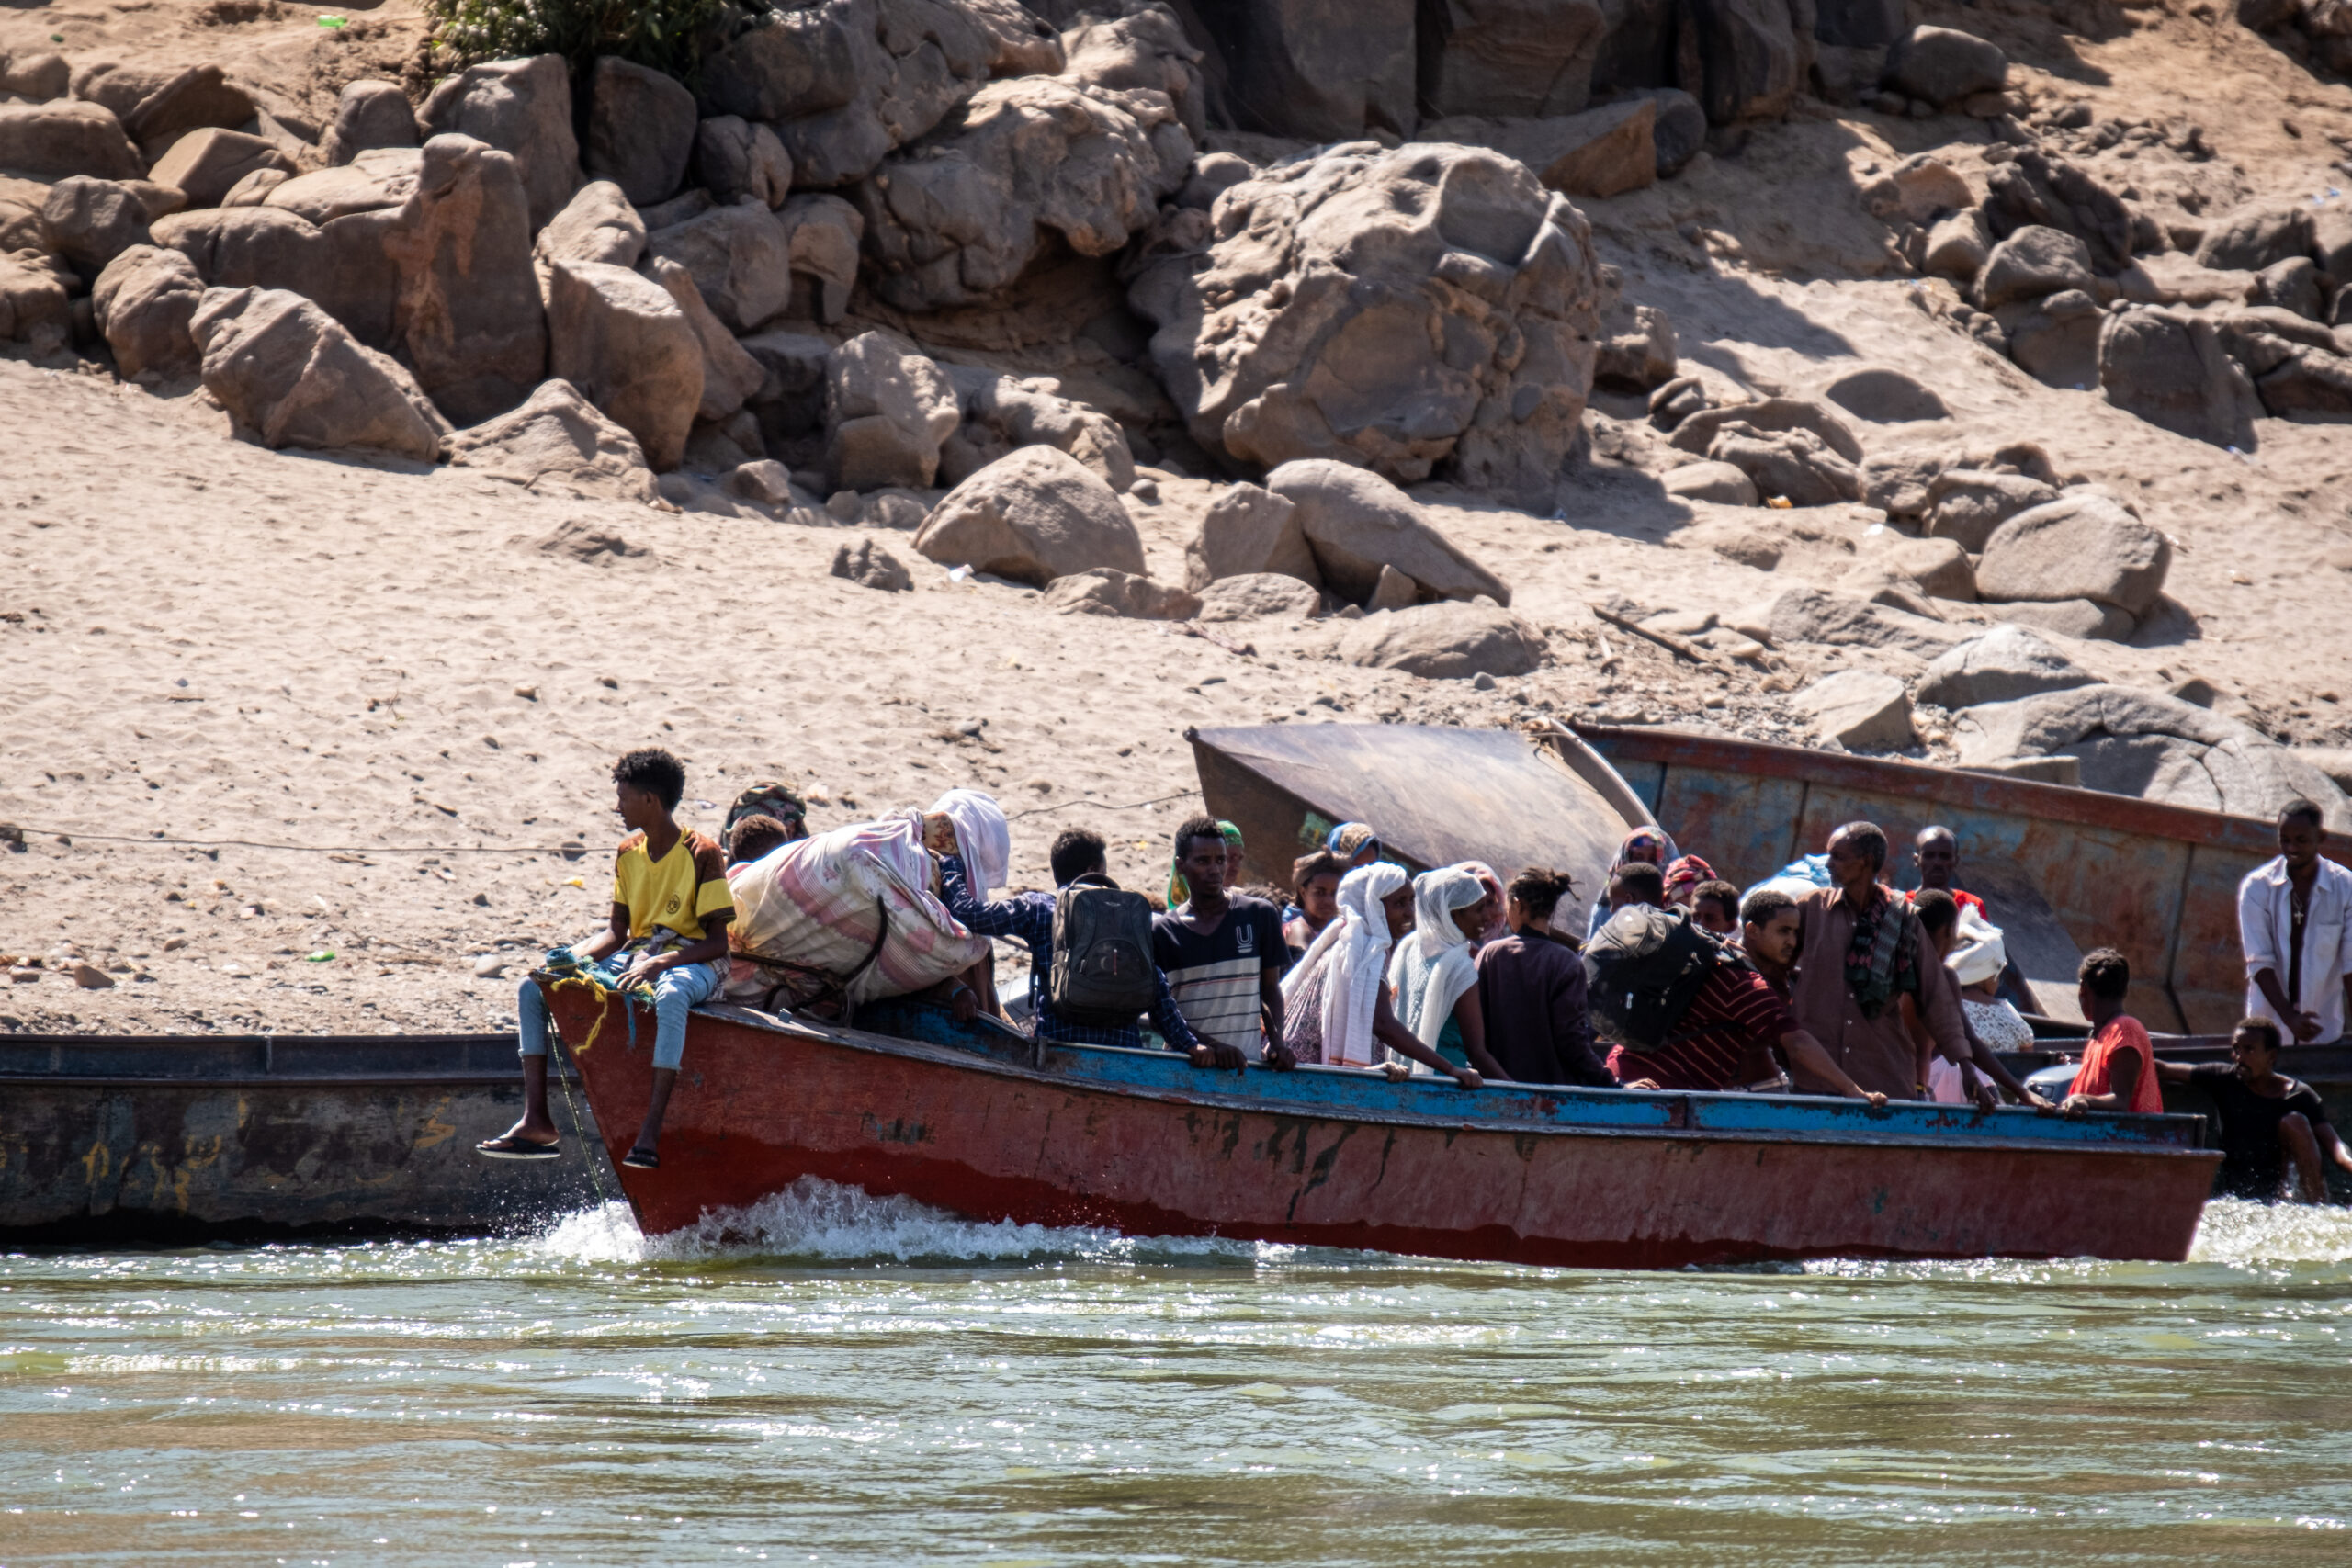 Ethiopian refugees crossing the Tekeze River in a boat. Photo by Joost Bastmeijer.